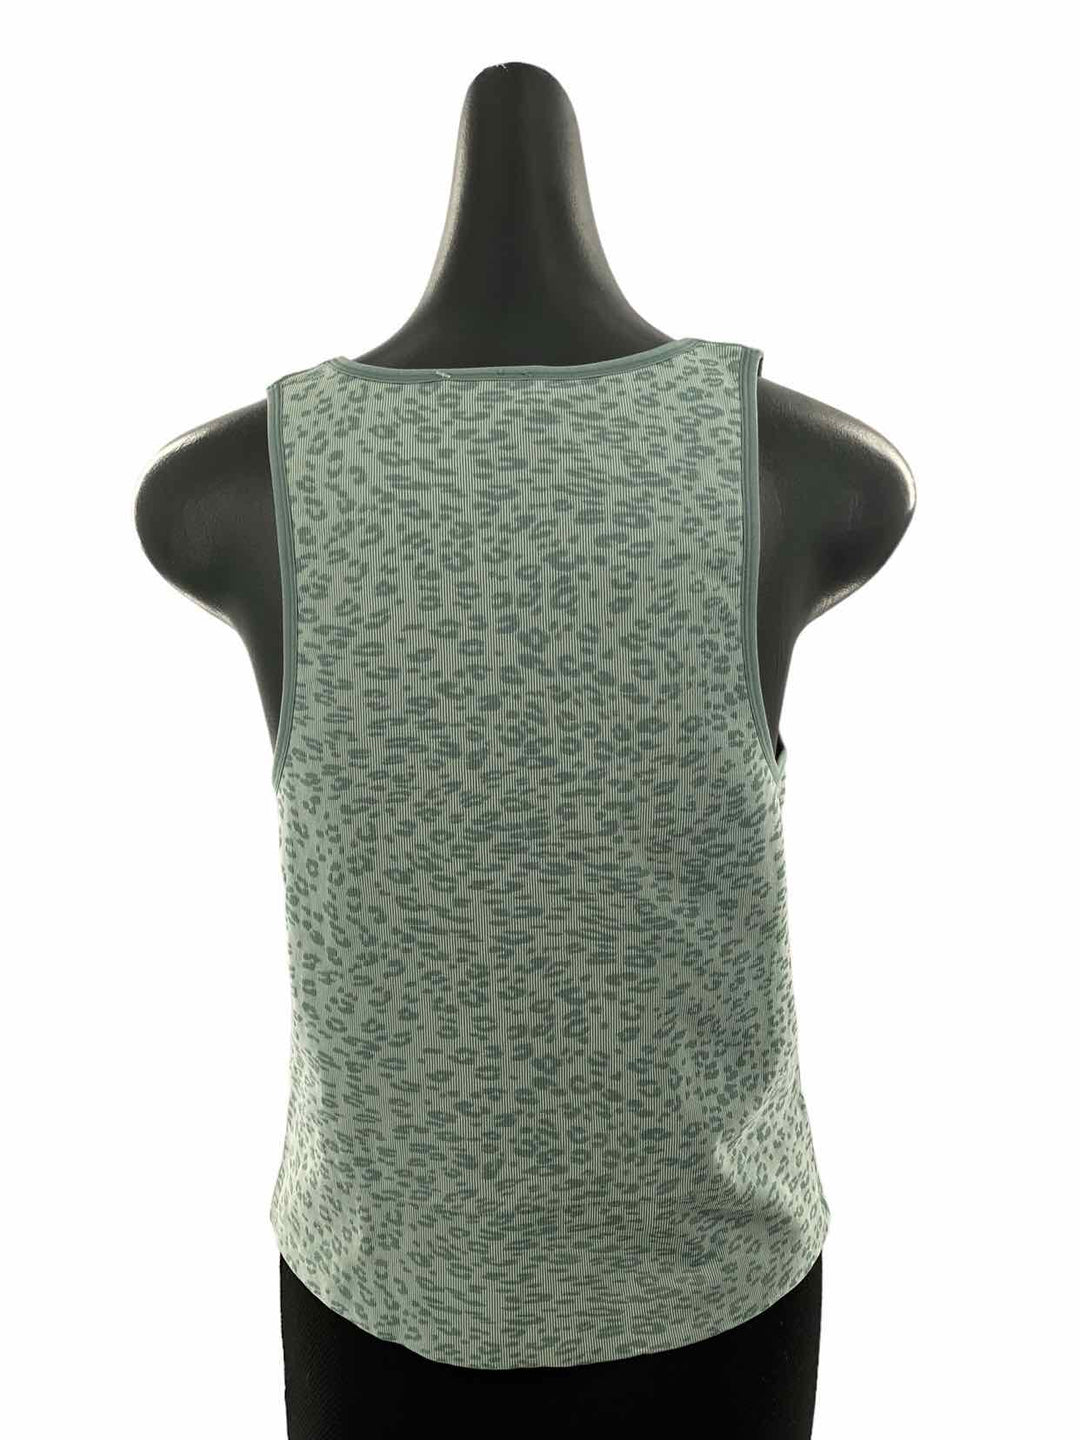 Unknown Brand Size XL Teal leapard Athletic Tank Top